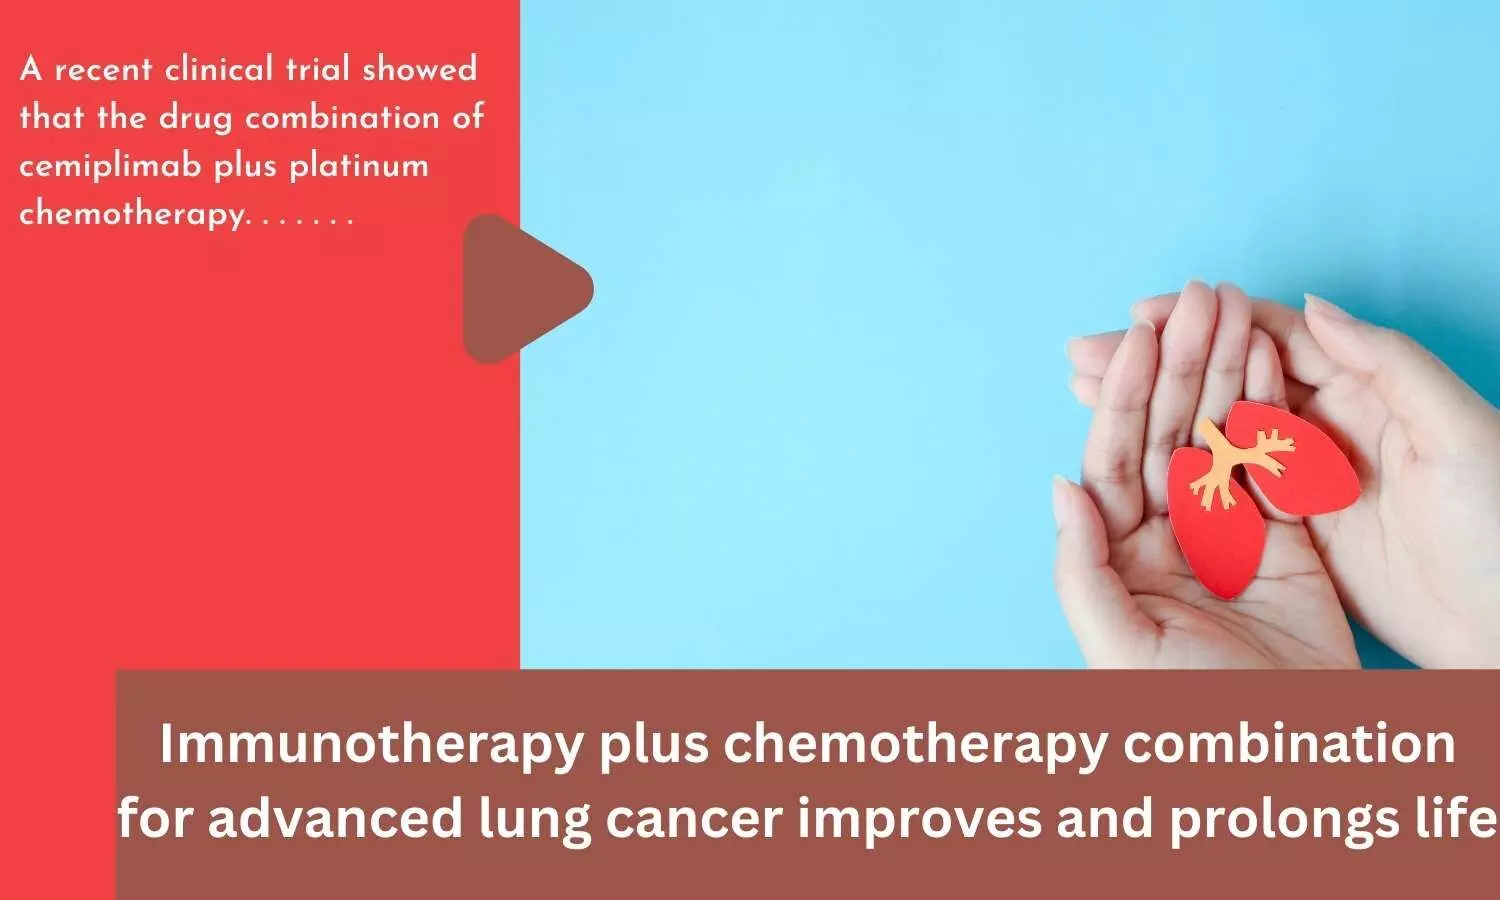 Immunotherapy plus chemotherapy combination for advanced lung cancer improves and prolongs life